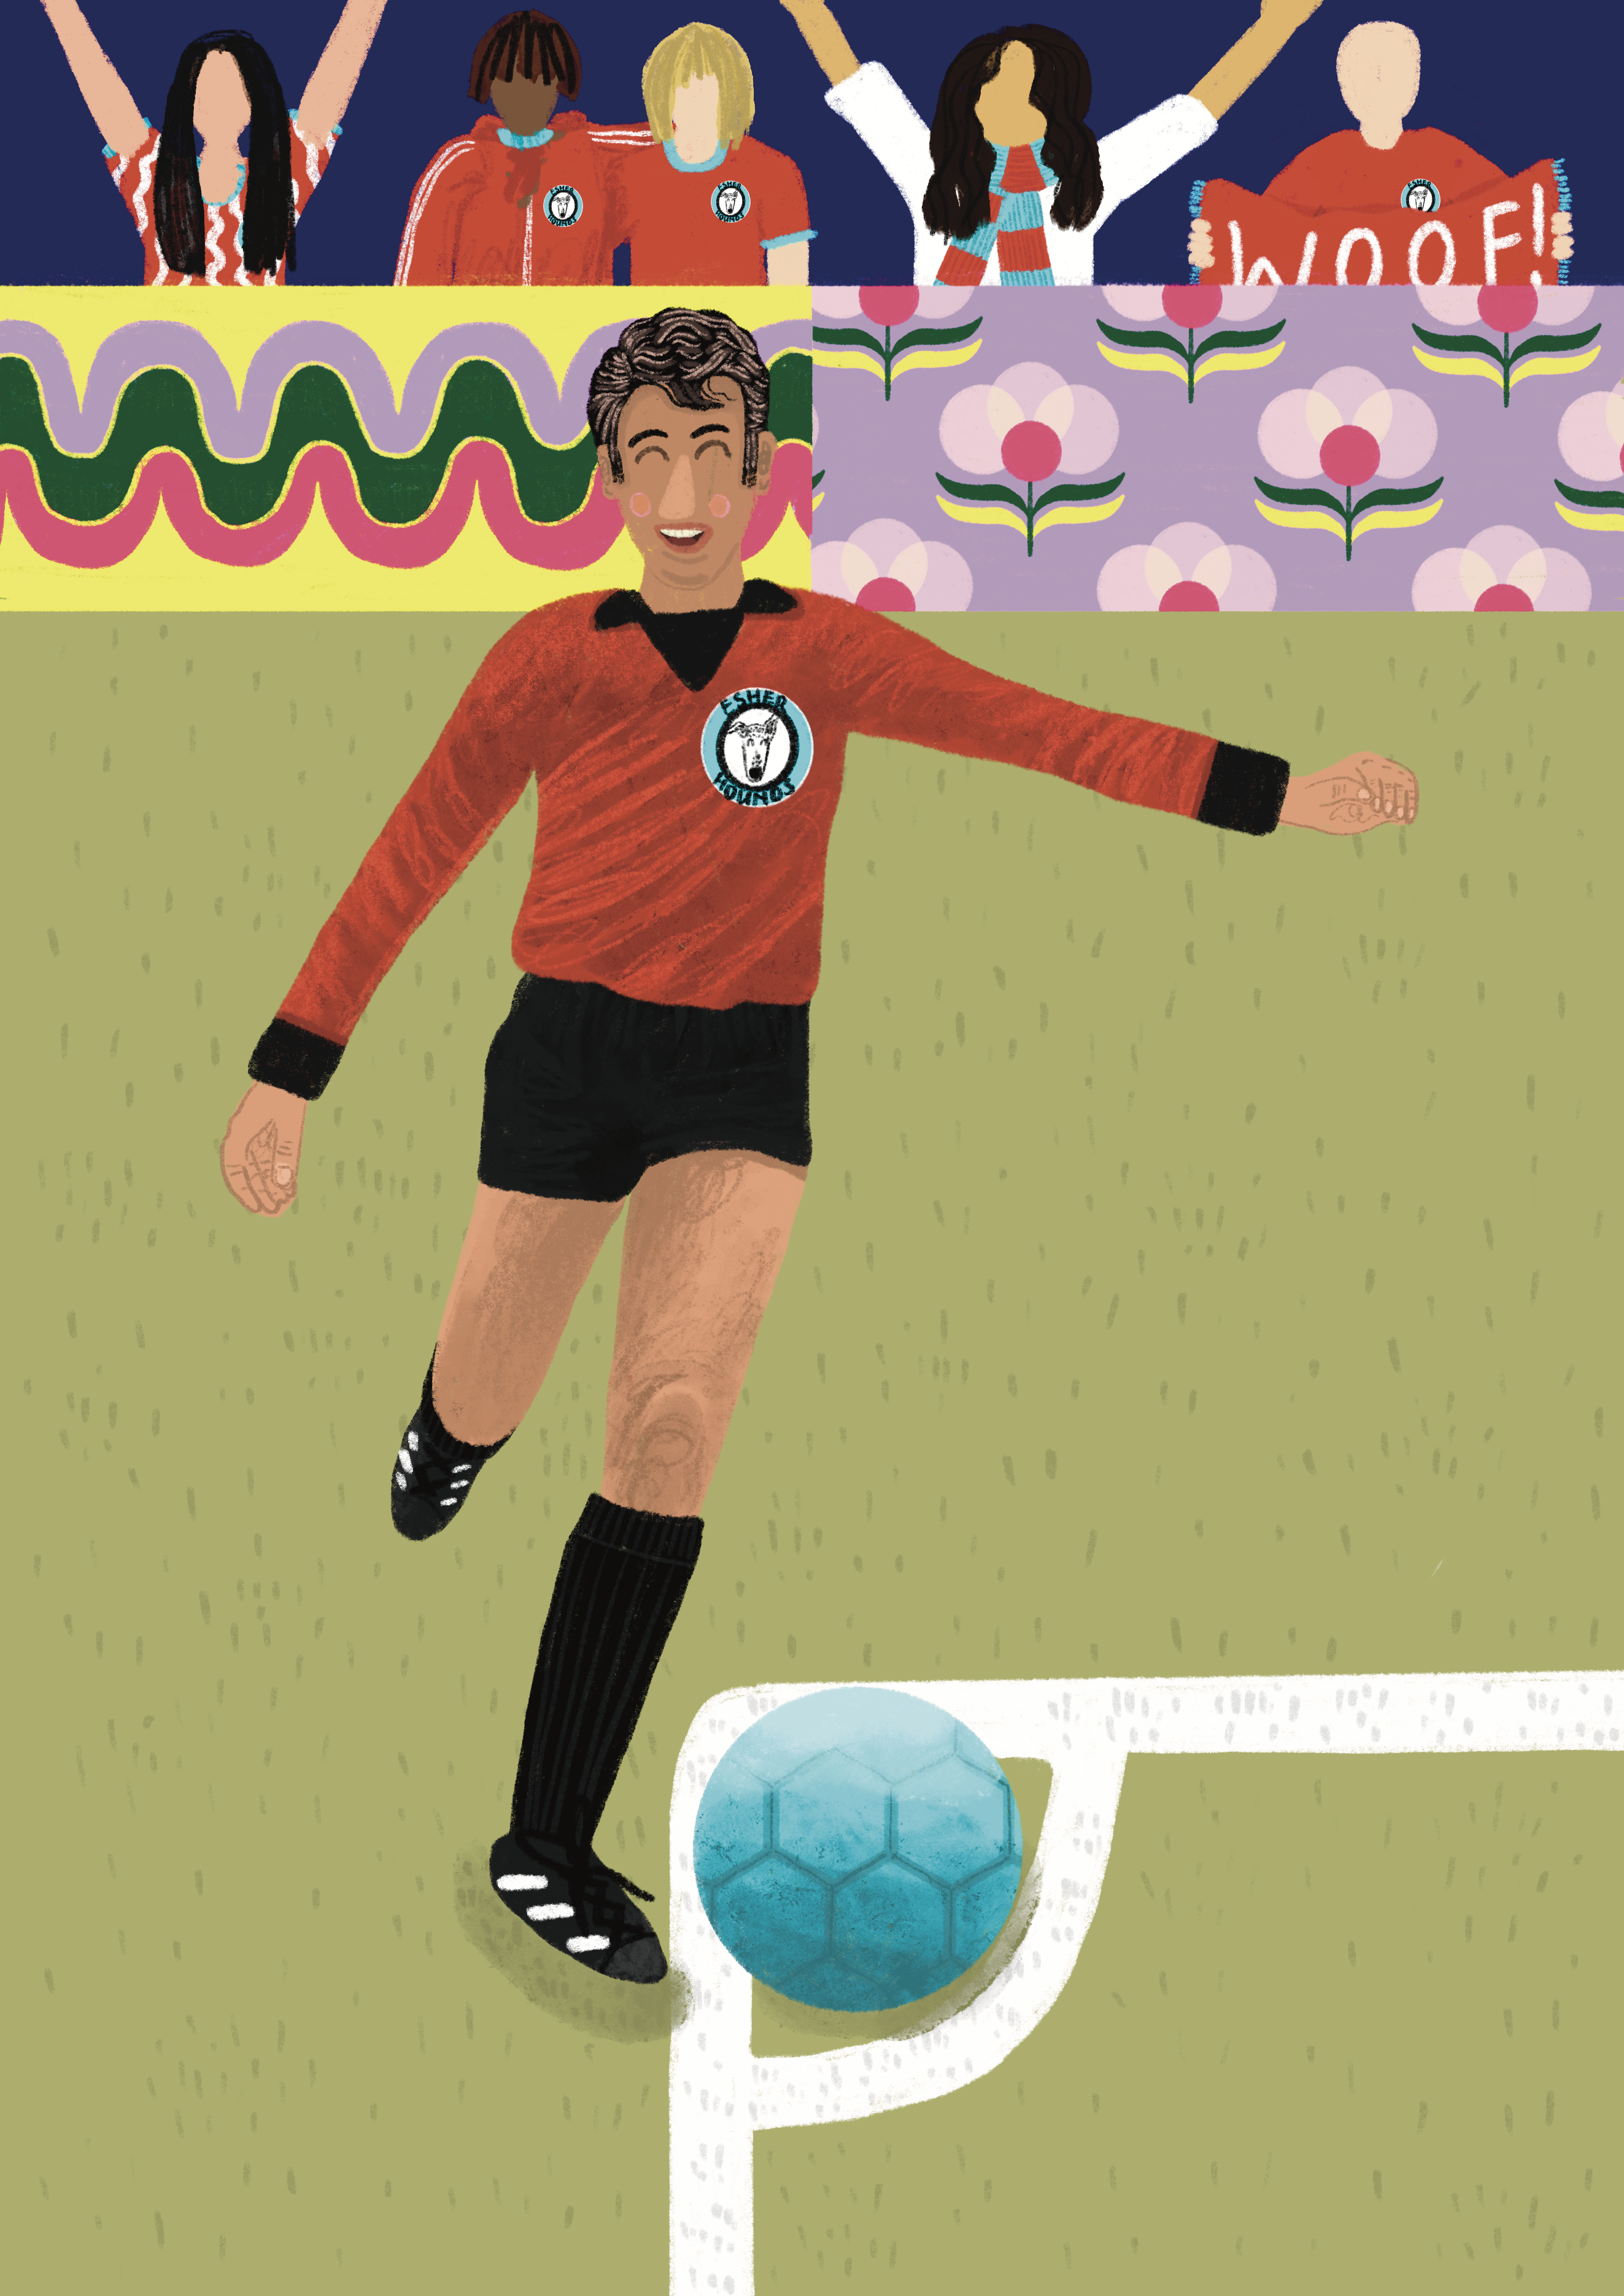 An illustration done by Hope Bullen with a man in a red football kit preparing to take a corner. There are fans behind the barrier cheering him on.